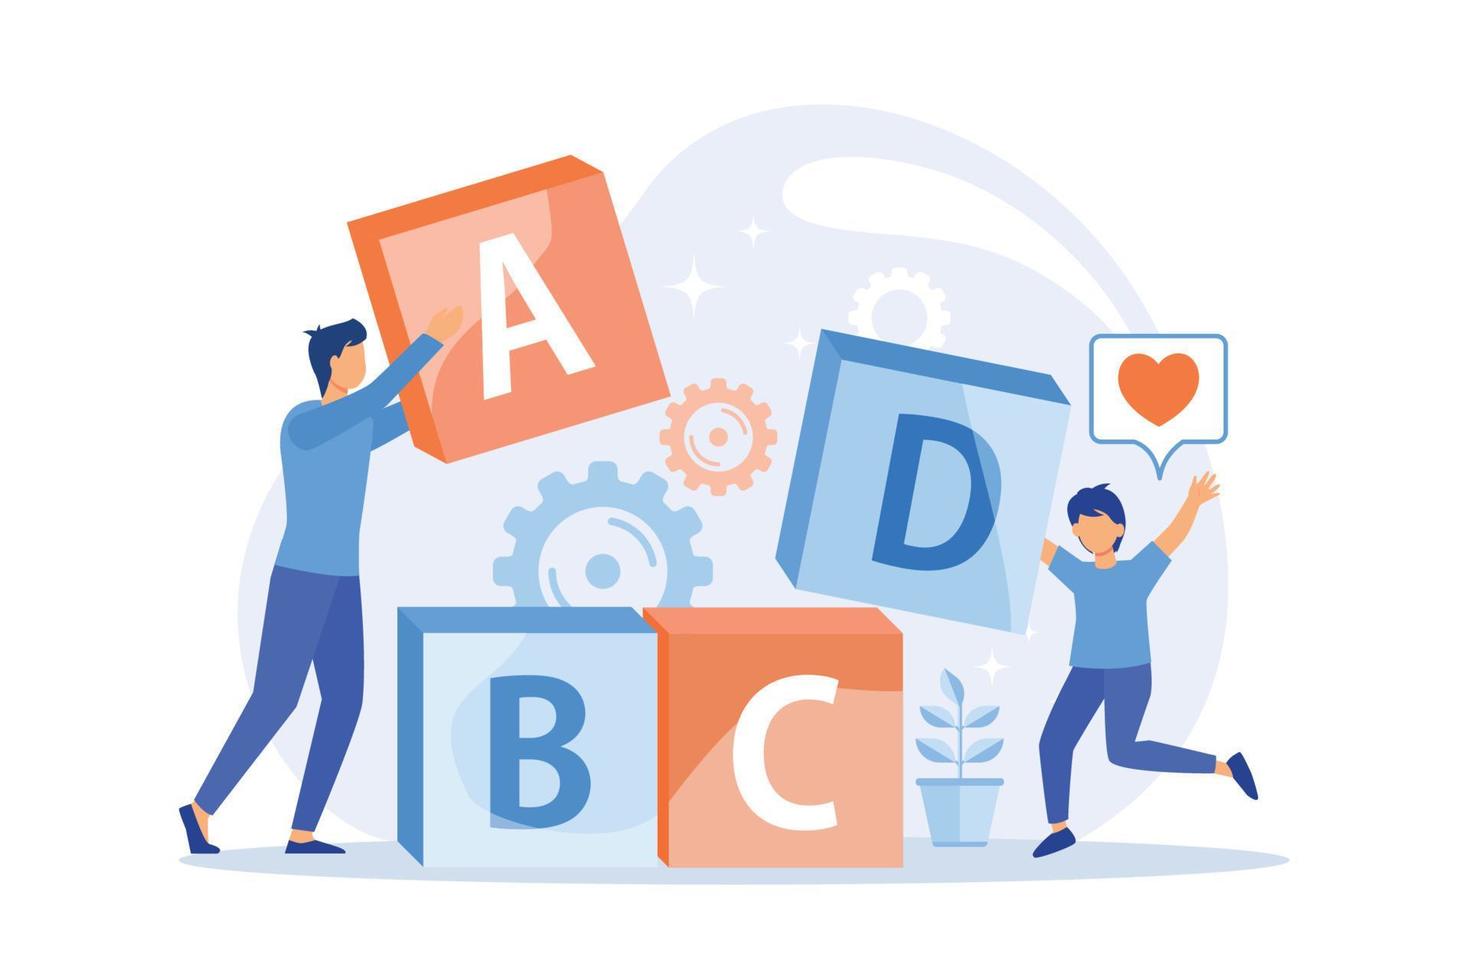 Primary school education. Developing games, entertaining study, elementary grade. Little schoolboy and educator playing with abc blocks. Vector illustration